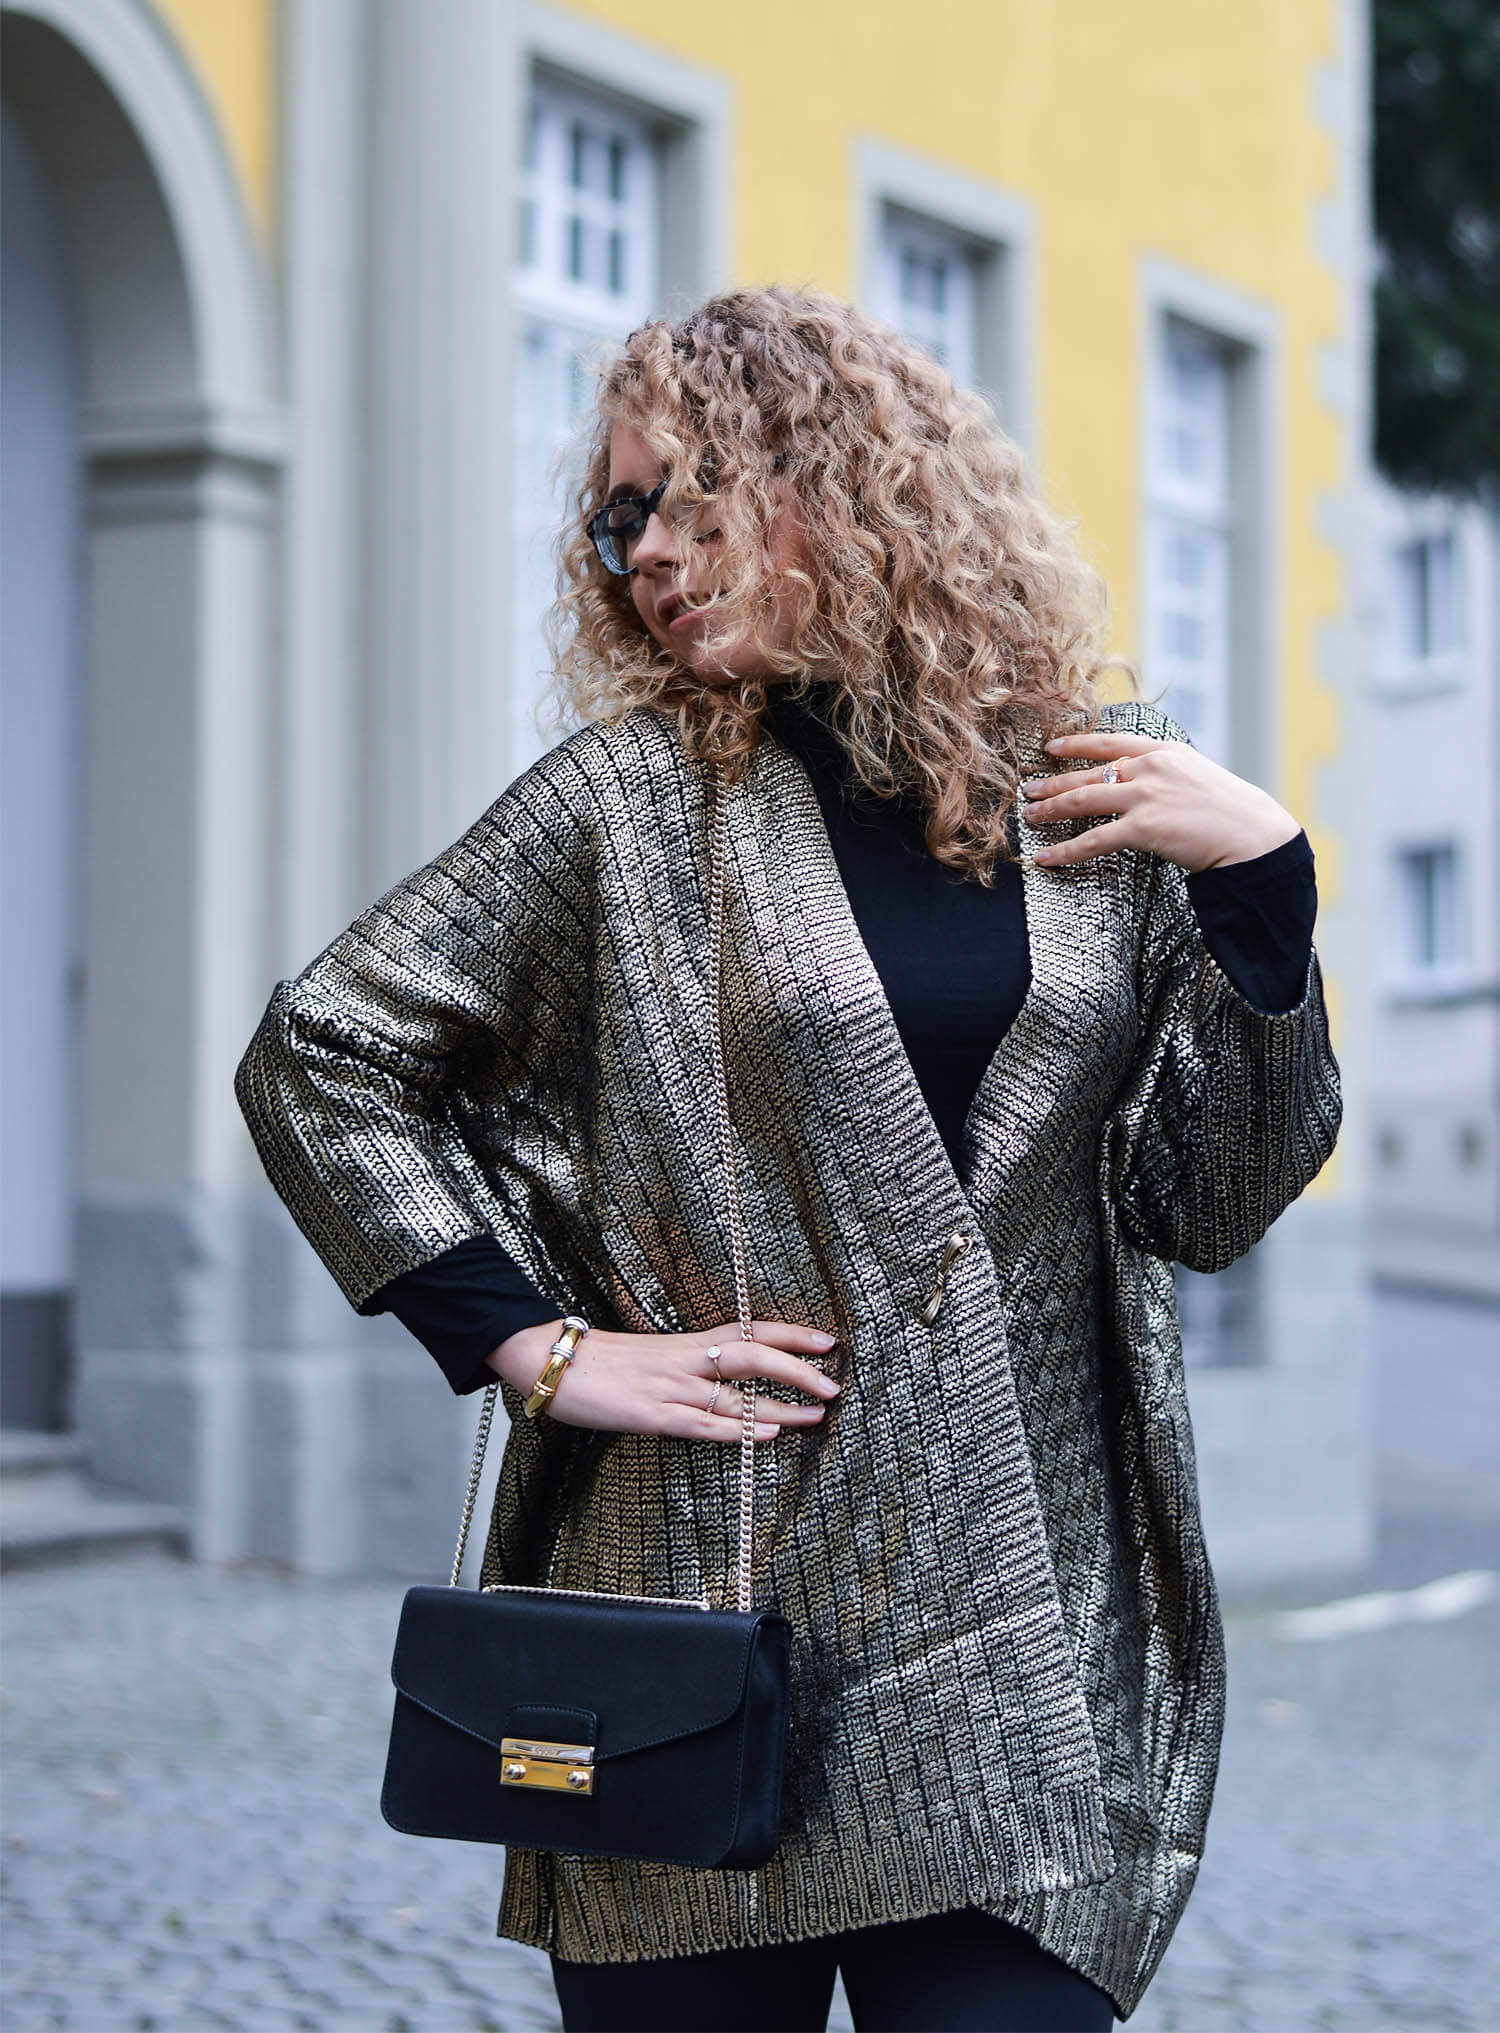 Outfit: Golden metallic knit and patent shoes in mountaineering look